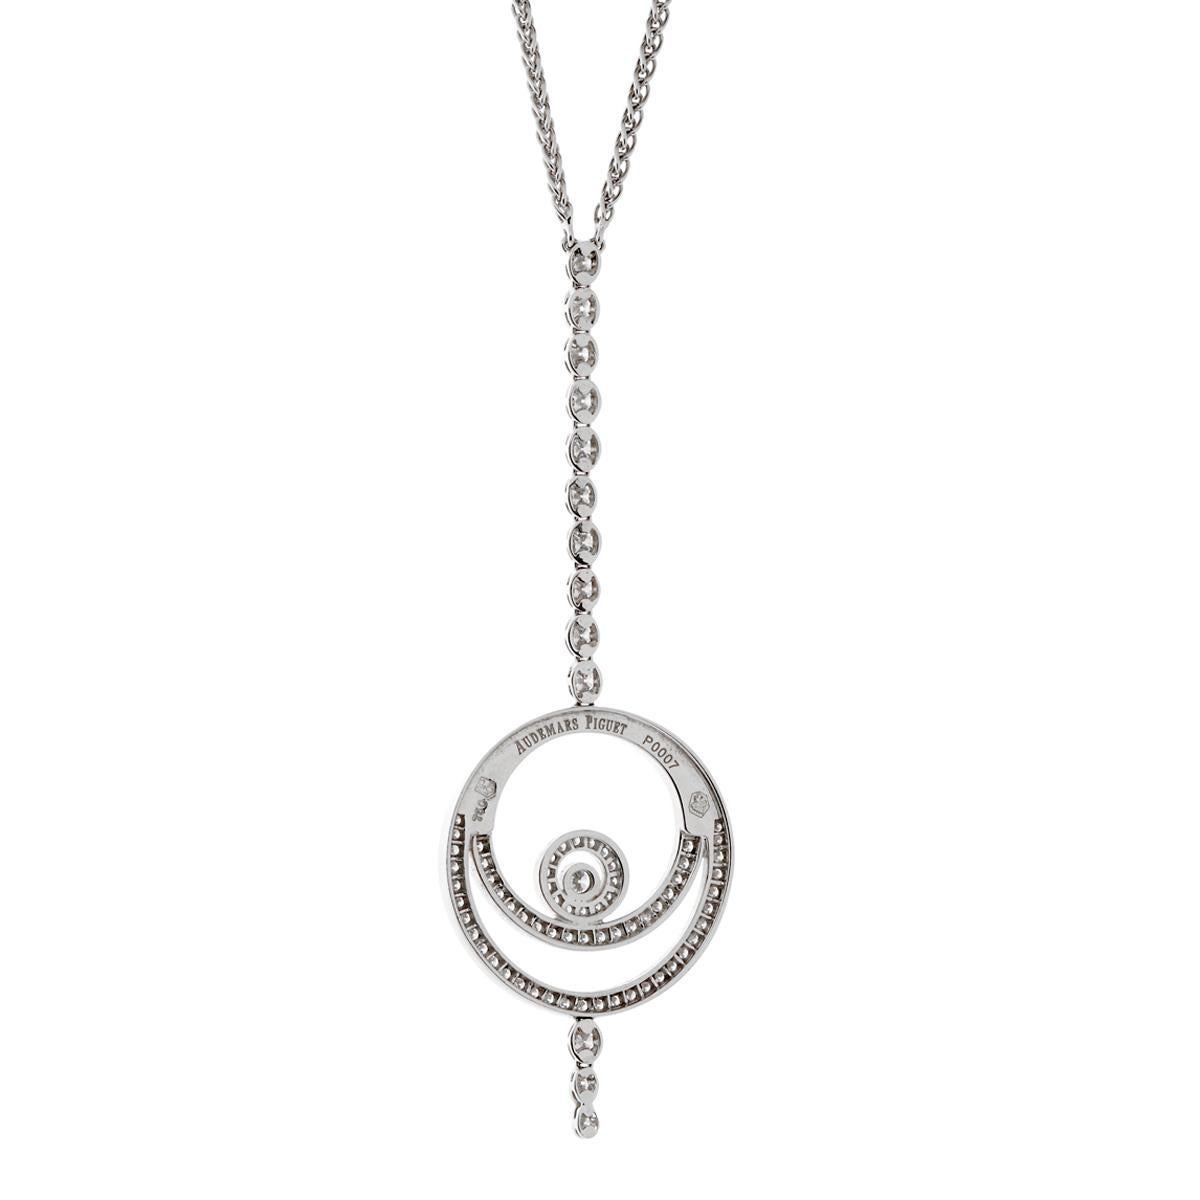 A gorgeous and elegant Audemars Piguet necklace that is sure to be the center of attention. Adorned with the finest round brilliant cut diamonds and set in 18k white gold, this necklace is a timeless piece that will last a lifetime.

Sku: 869